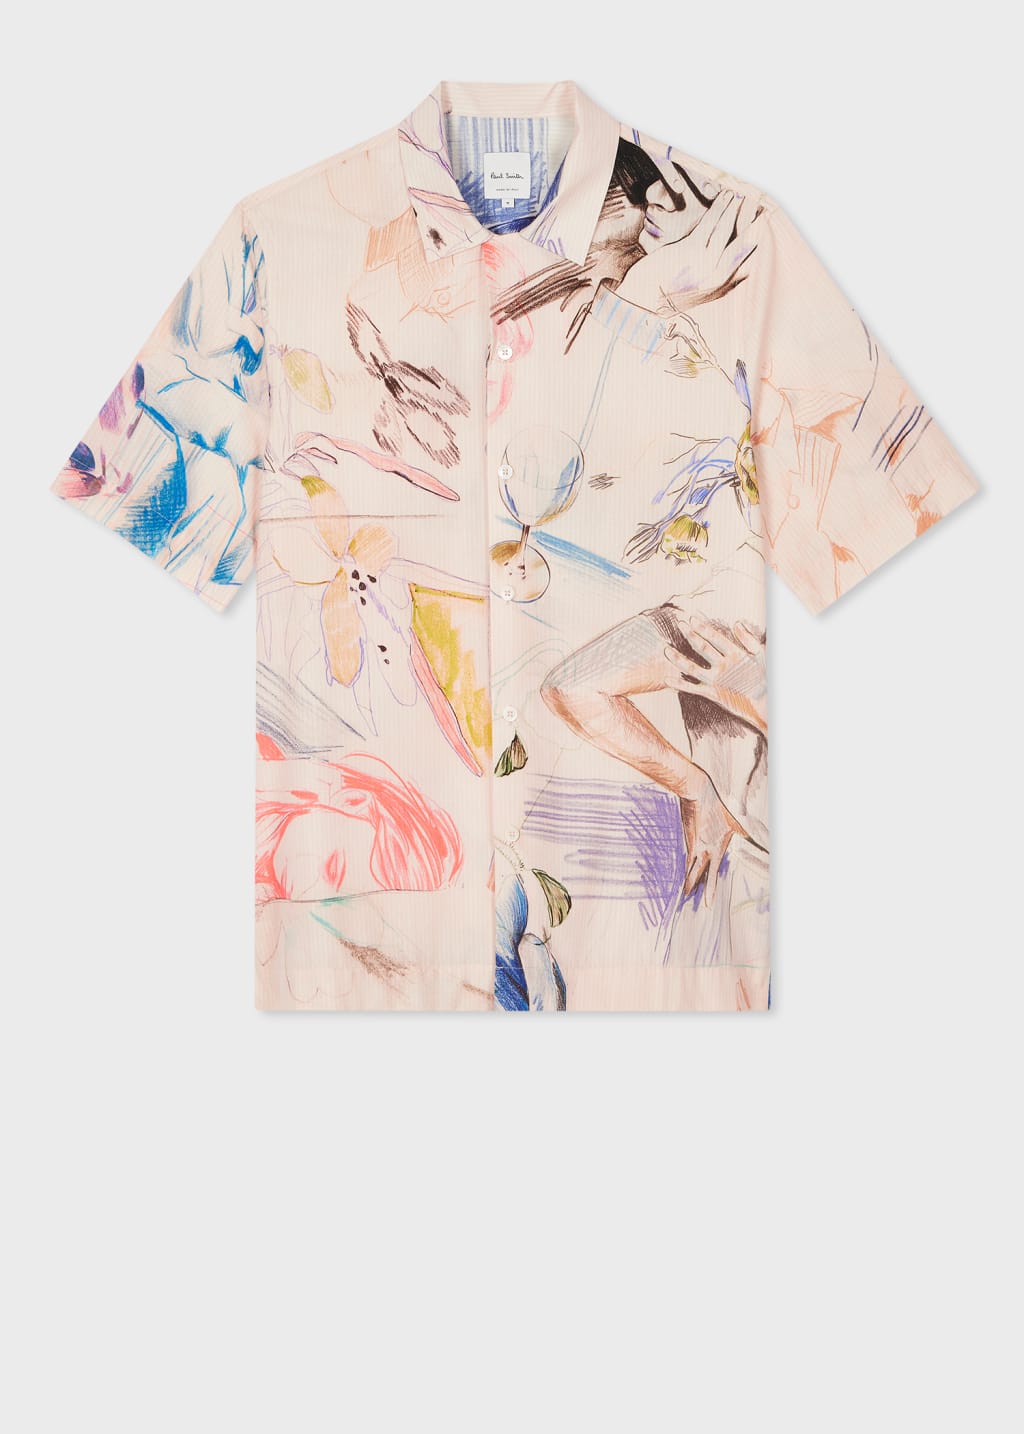 Product view - Dusty Pink 'Sketchbook' Print Cotton Shirt Paul Smith